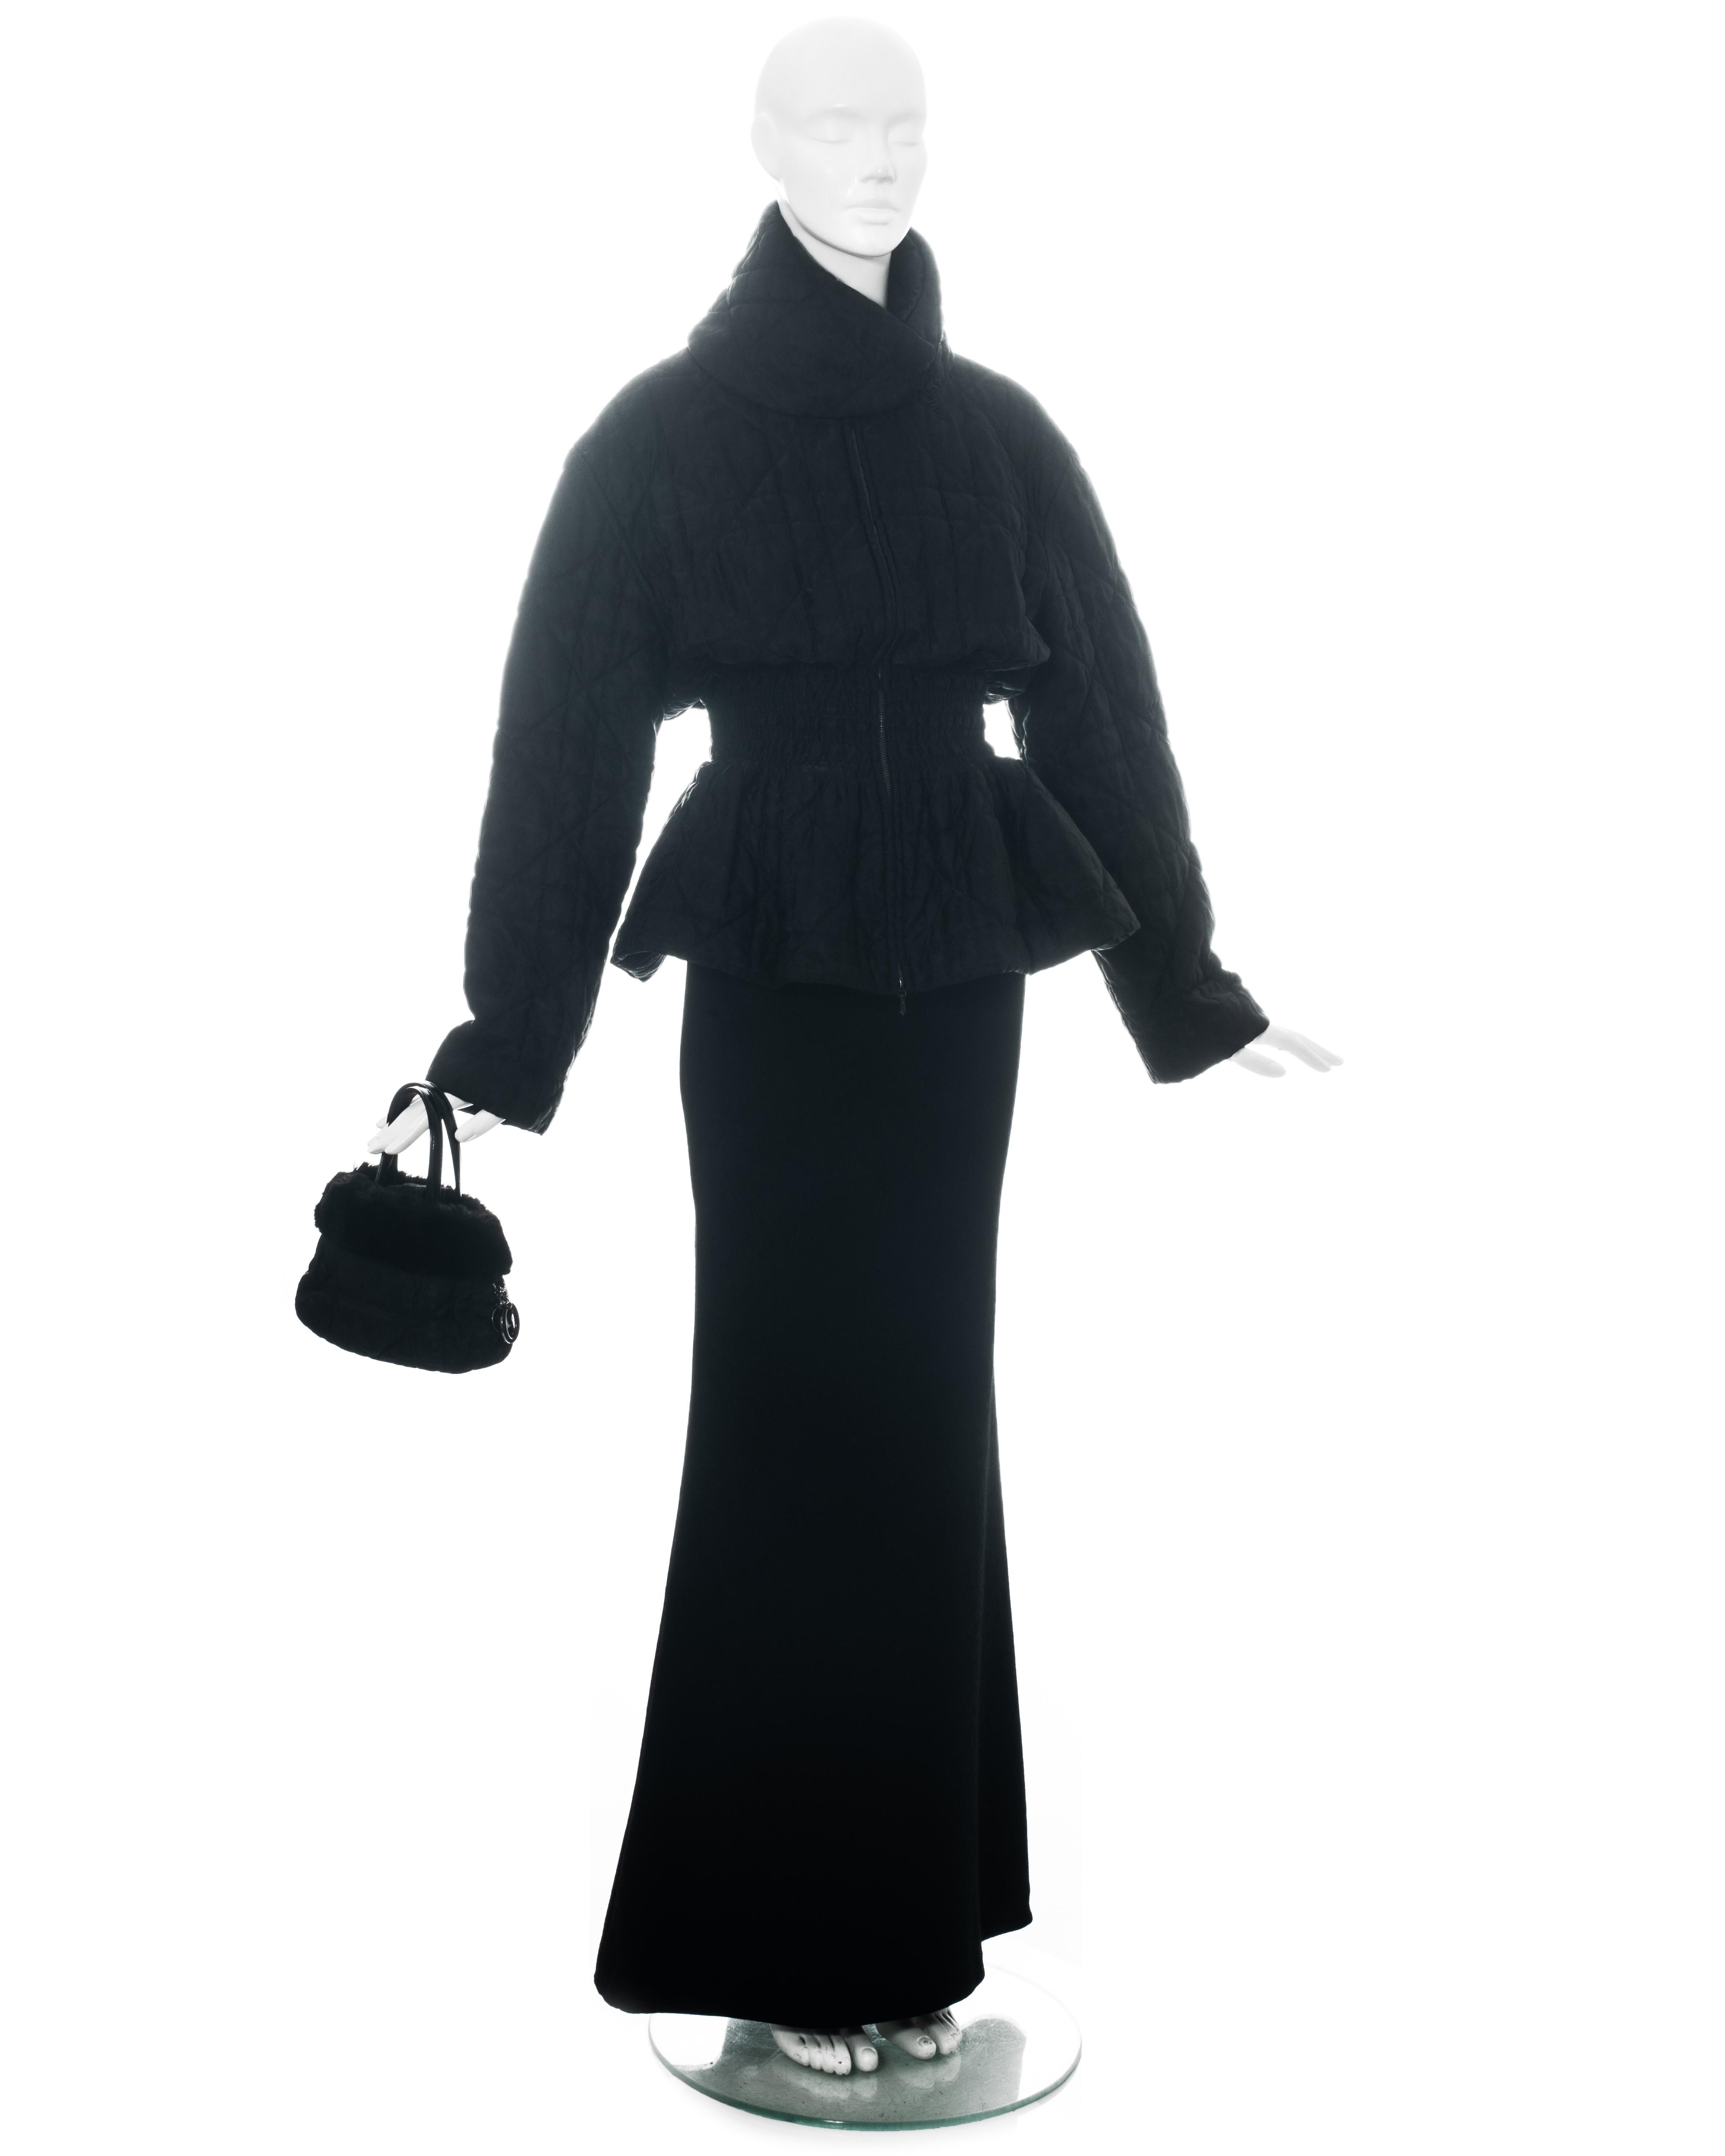 Christian Dior by John Galliano black 3 piece runway ensemble comprising: monogram Cannage quilted nylon jacket with shirred waistband, mini handbag and mini backpack with fur trim and wool jacquard fishtail maxi skirt. 

Fall-Winter 1998